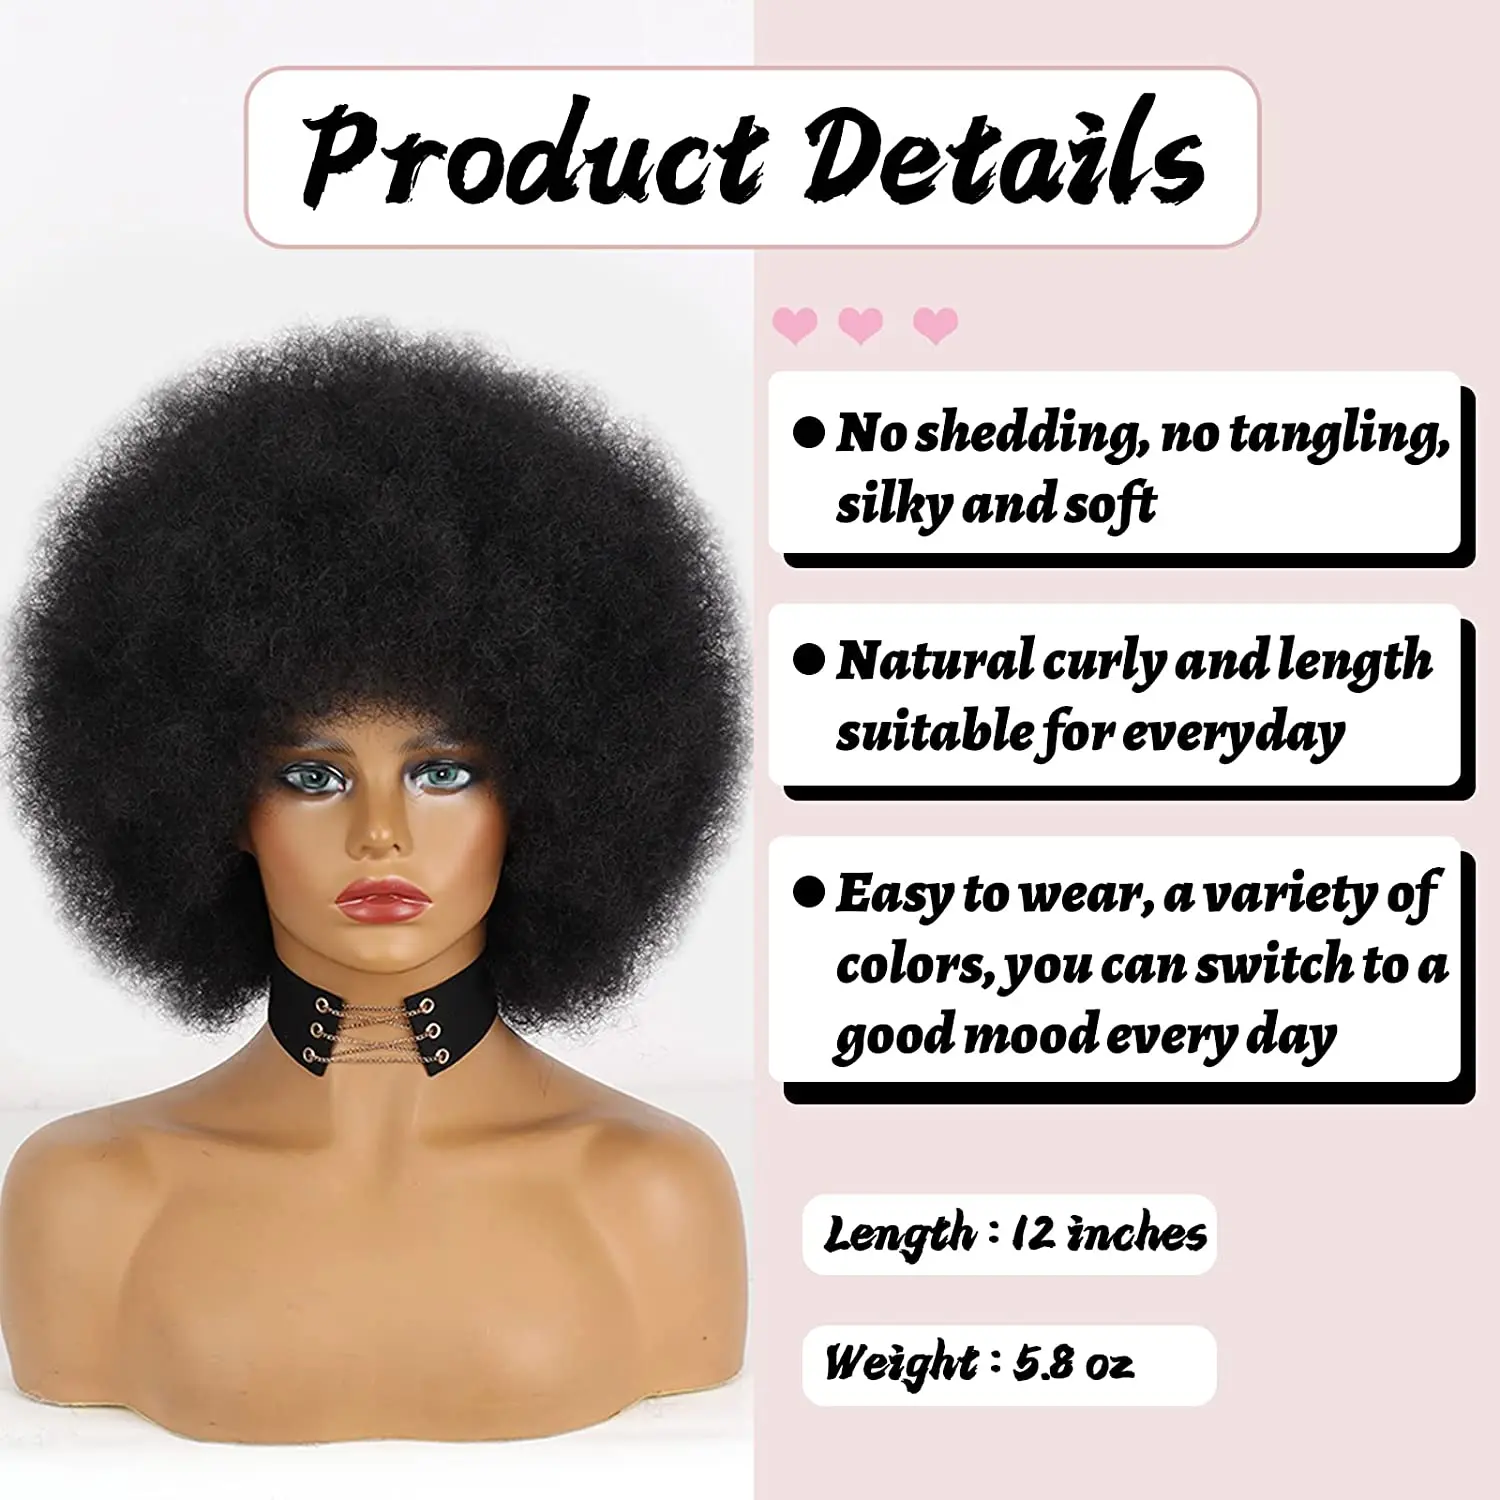 Curto Afro Kinky Curly Perucas com Franja